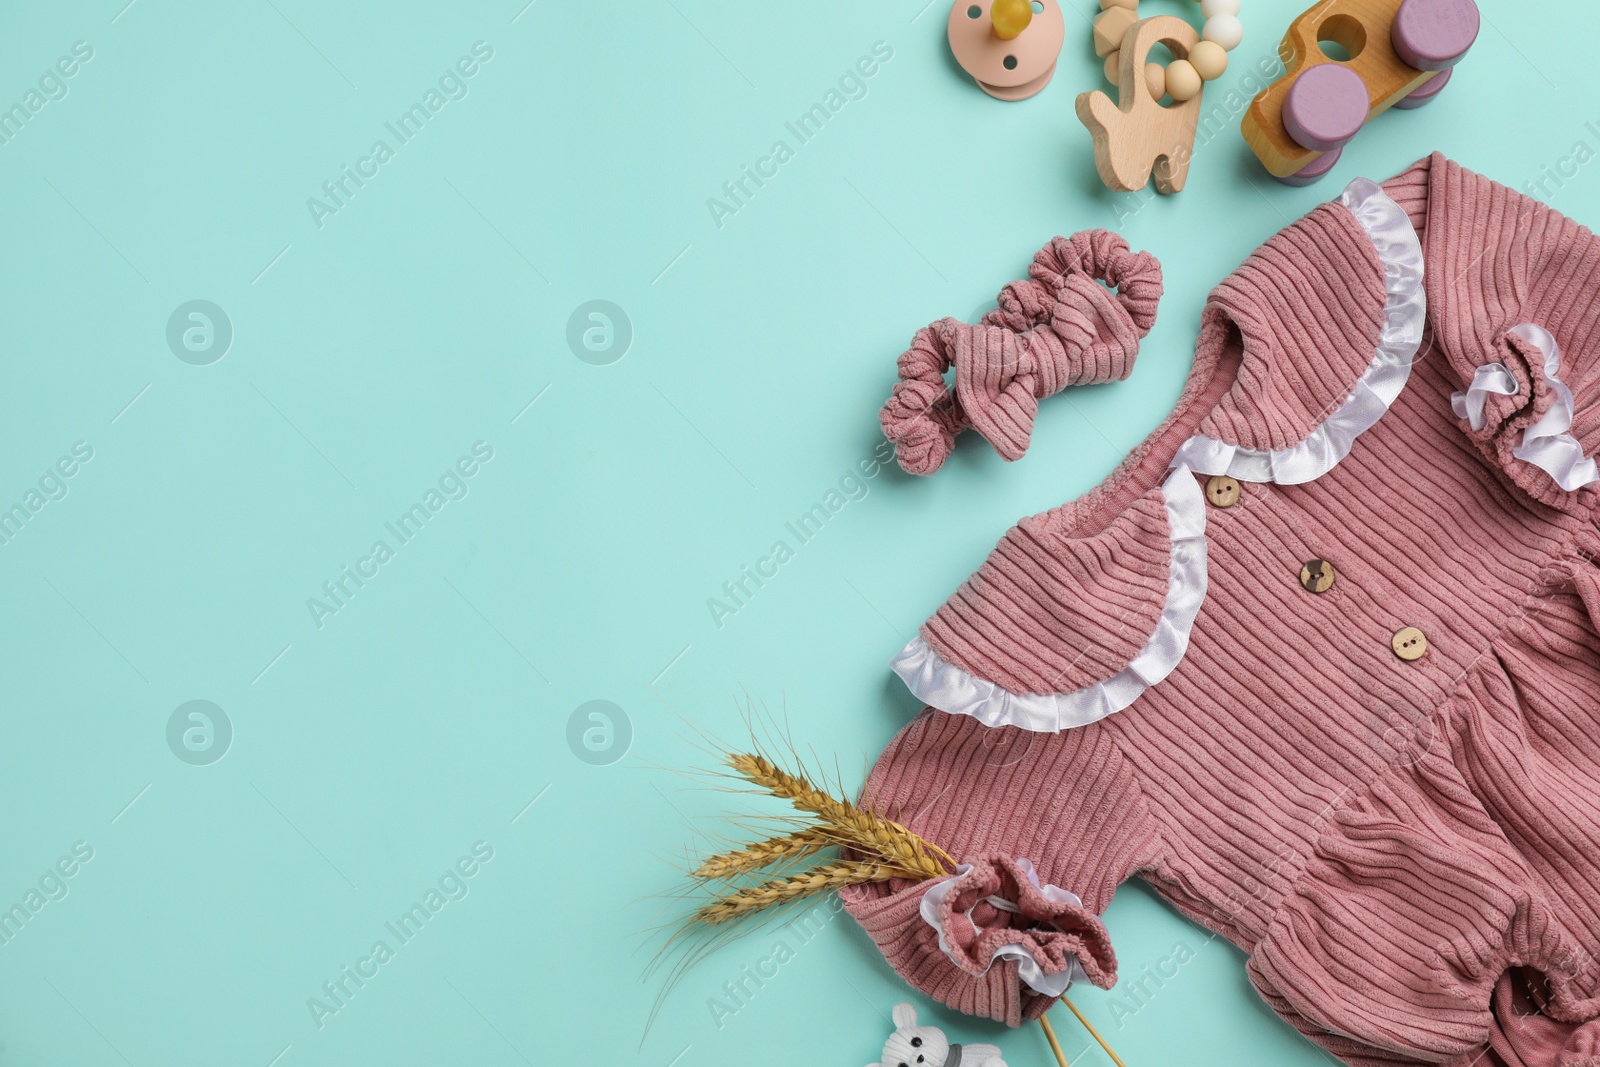 Photo of Flat lay composition with baby clothes and accessories on light blue background, space for text